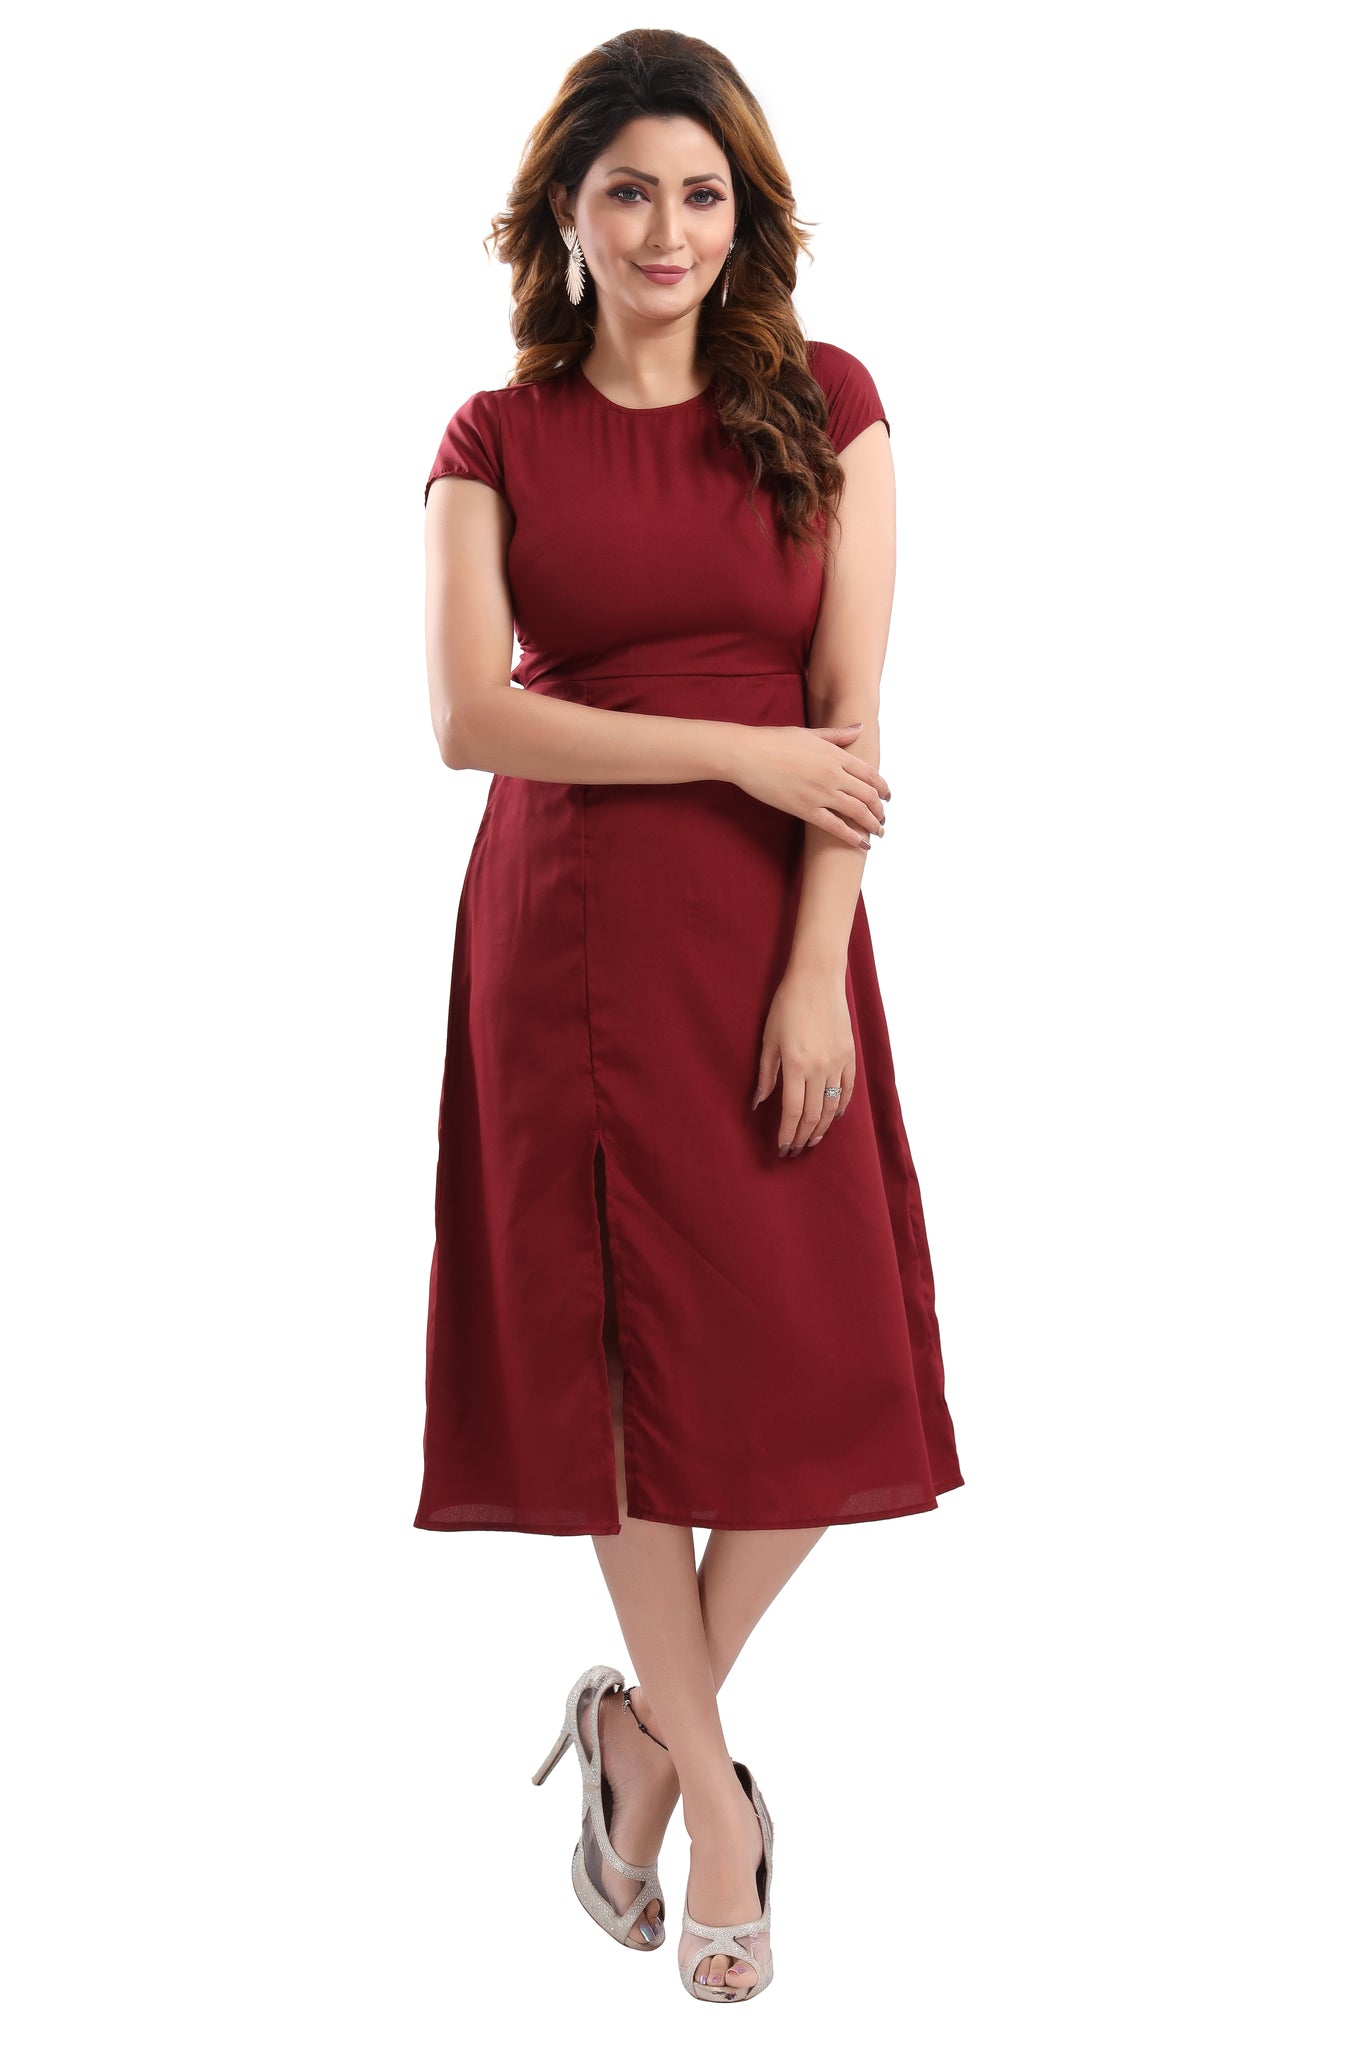 Solid Maroon A - Line Dress